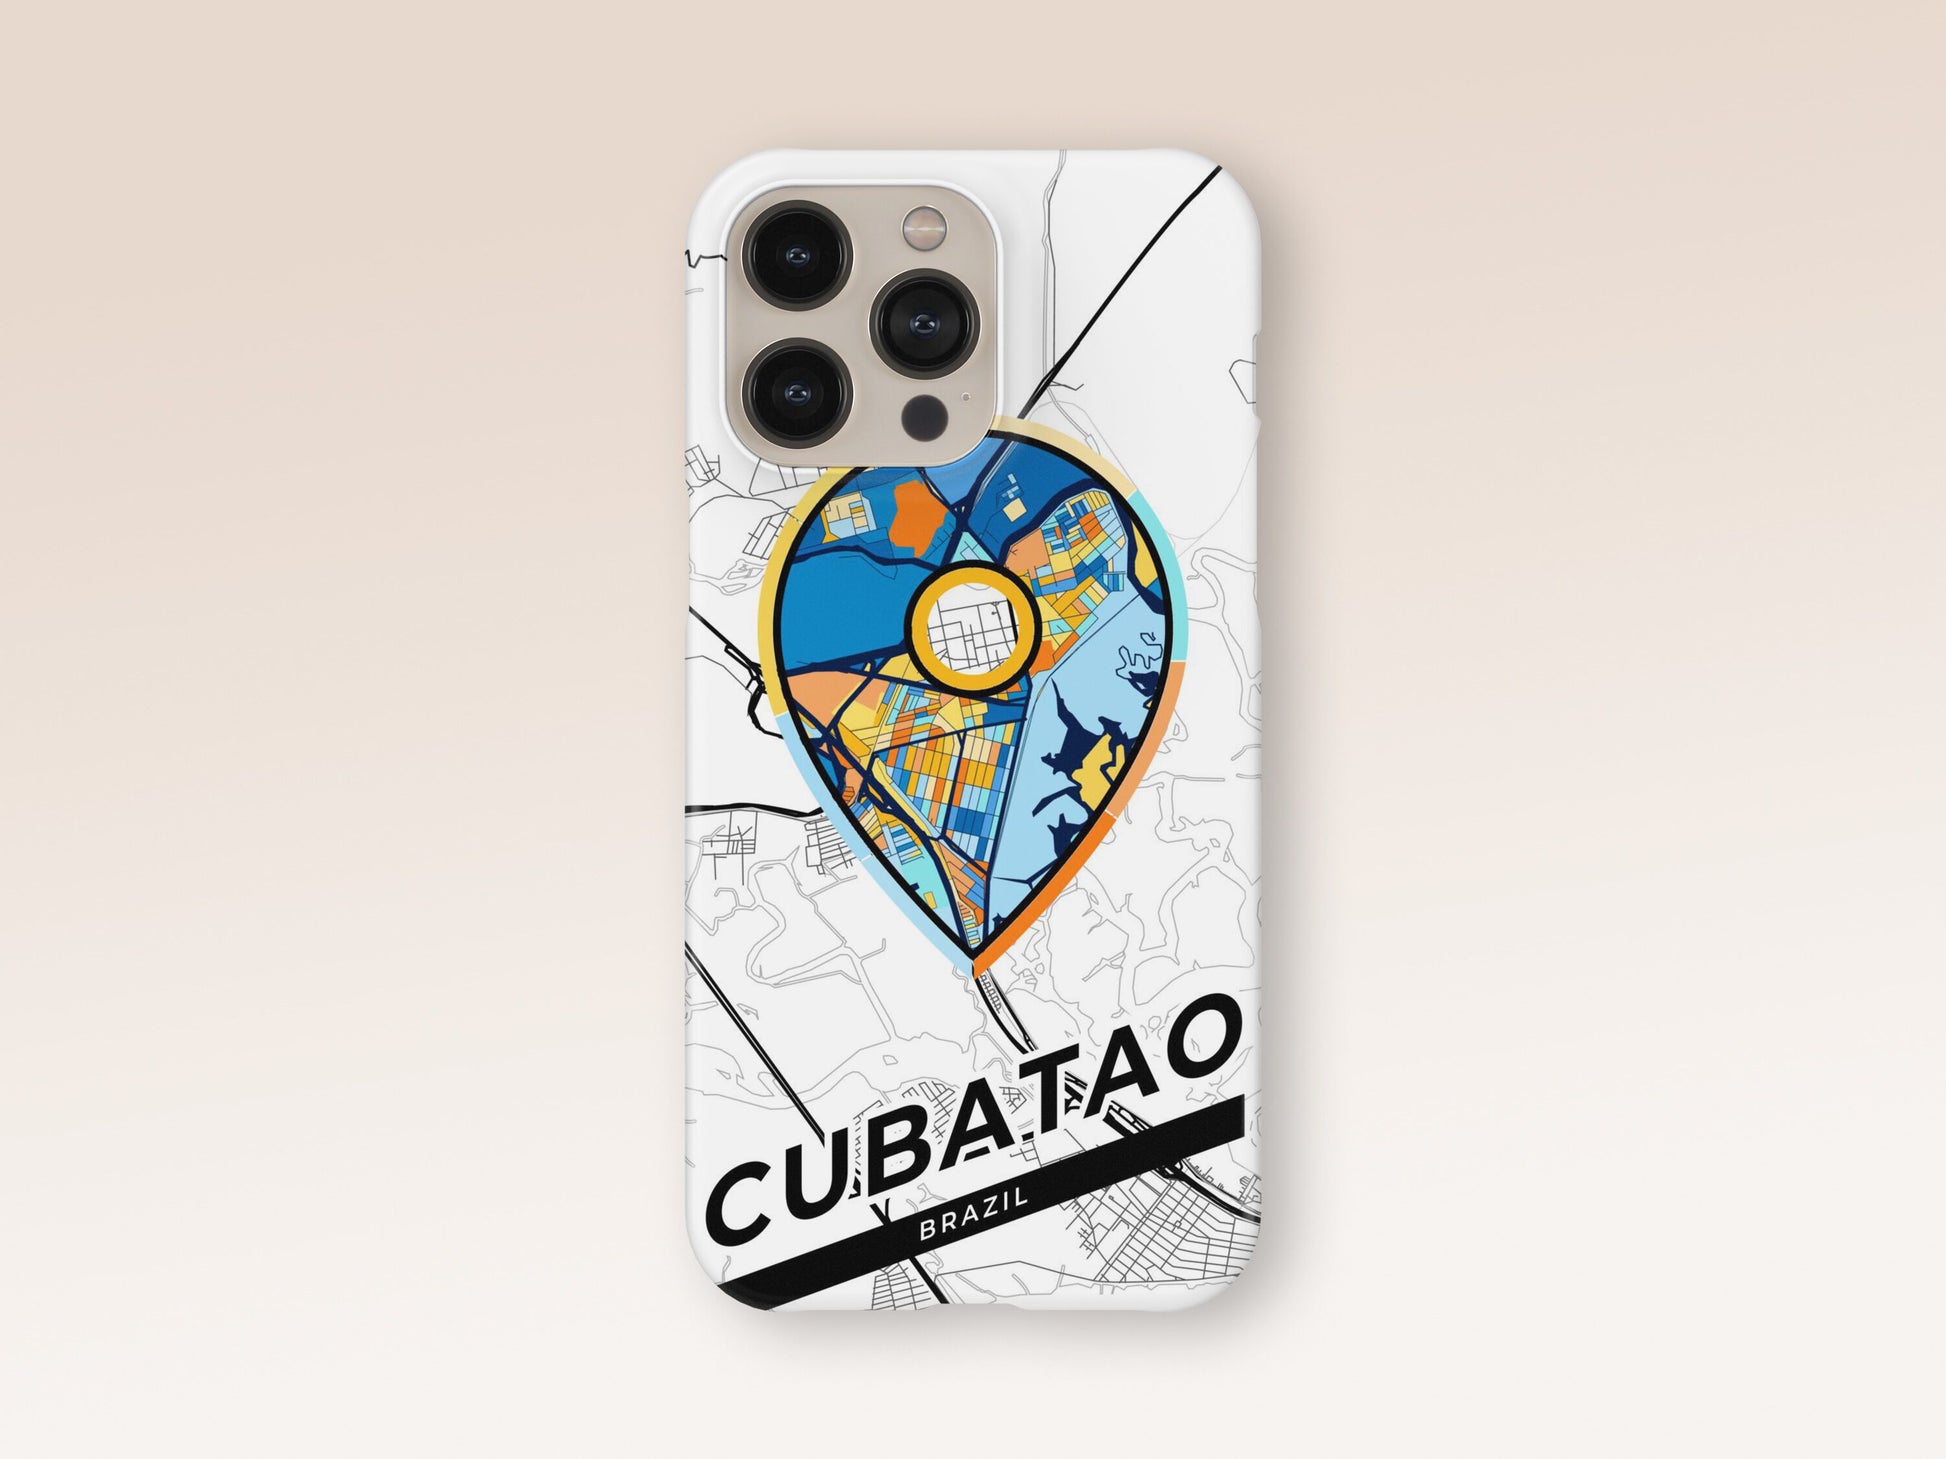 Cubatao Brazil slim phone case with colorful icon. Birthday, wedding or housewarming gift. Couple match cases. 1